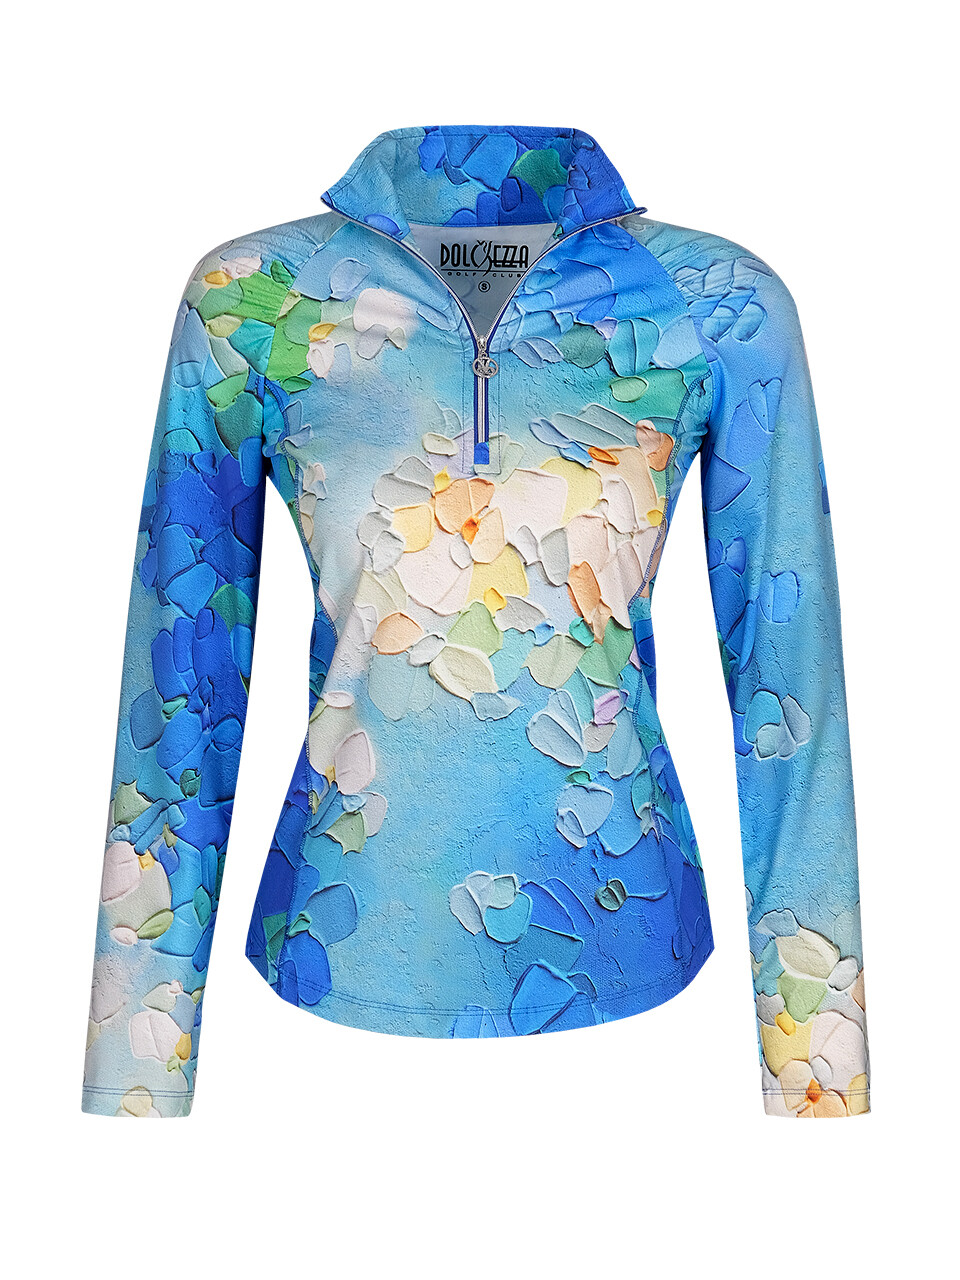 Golf Club Dolcezza: Tranquil Garden Comfort Art Top SOLD OUT